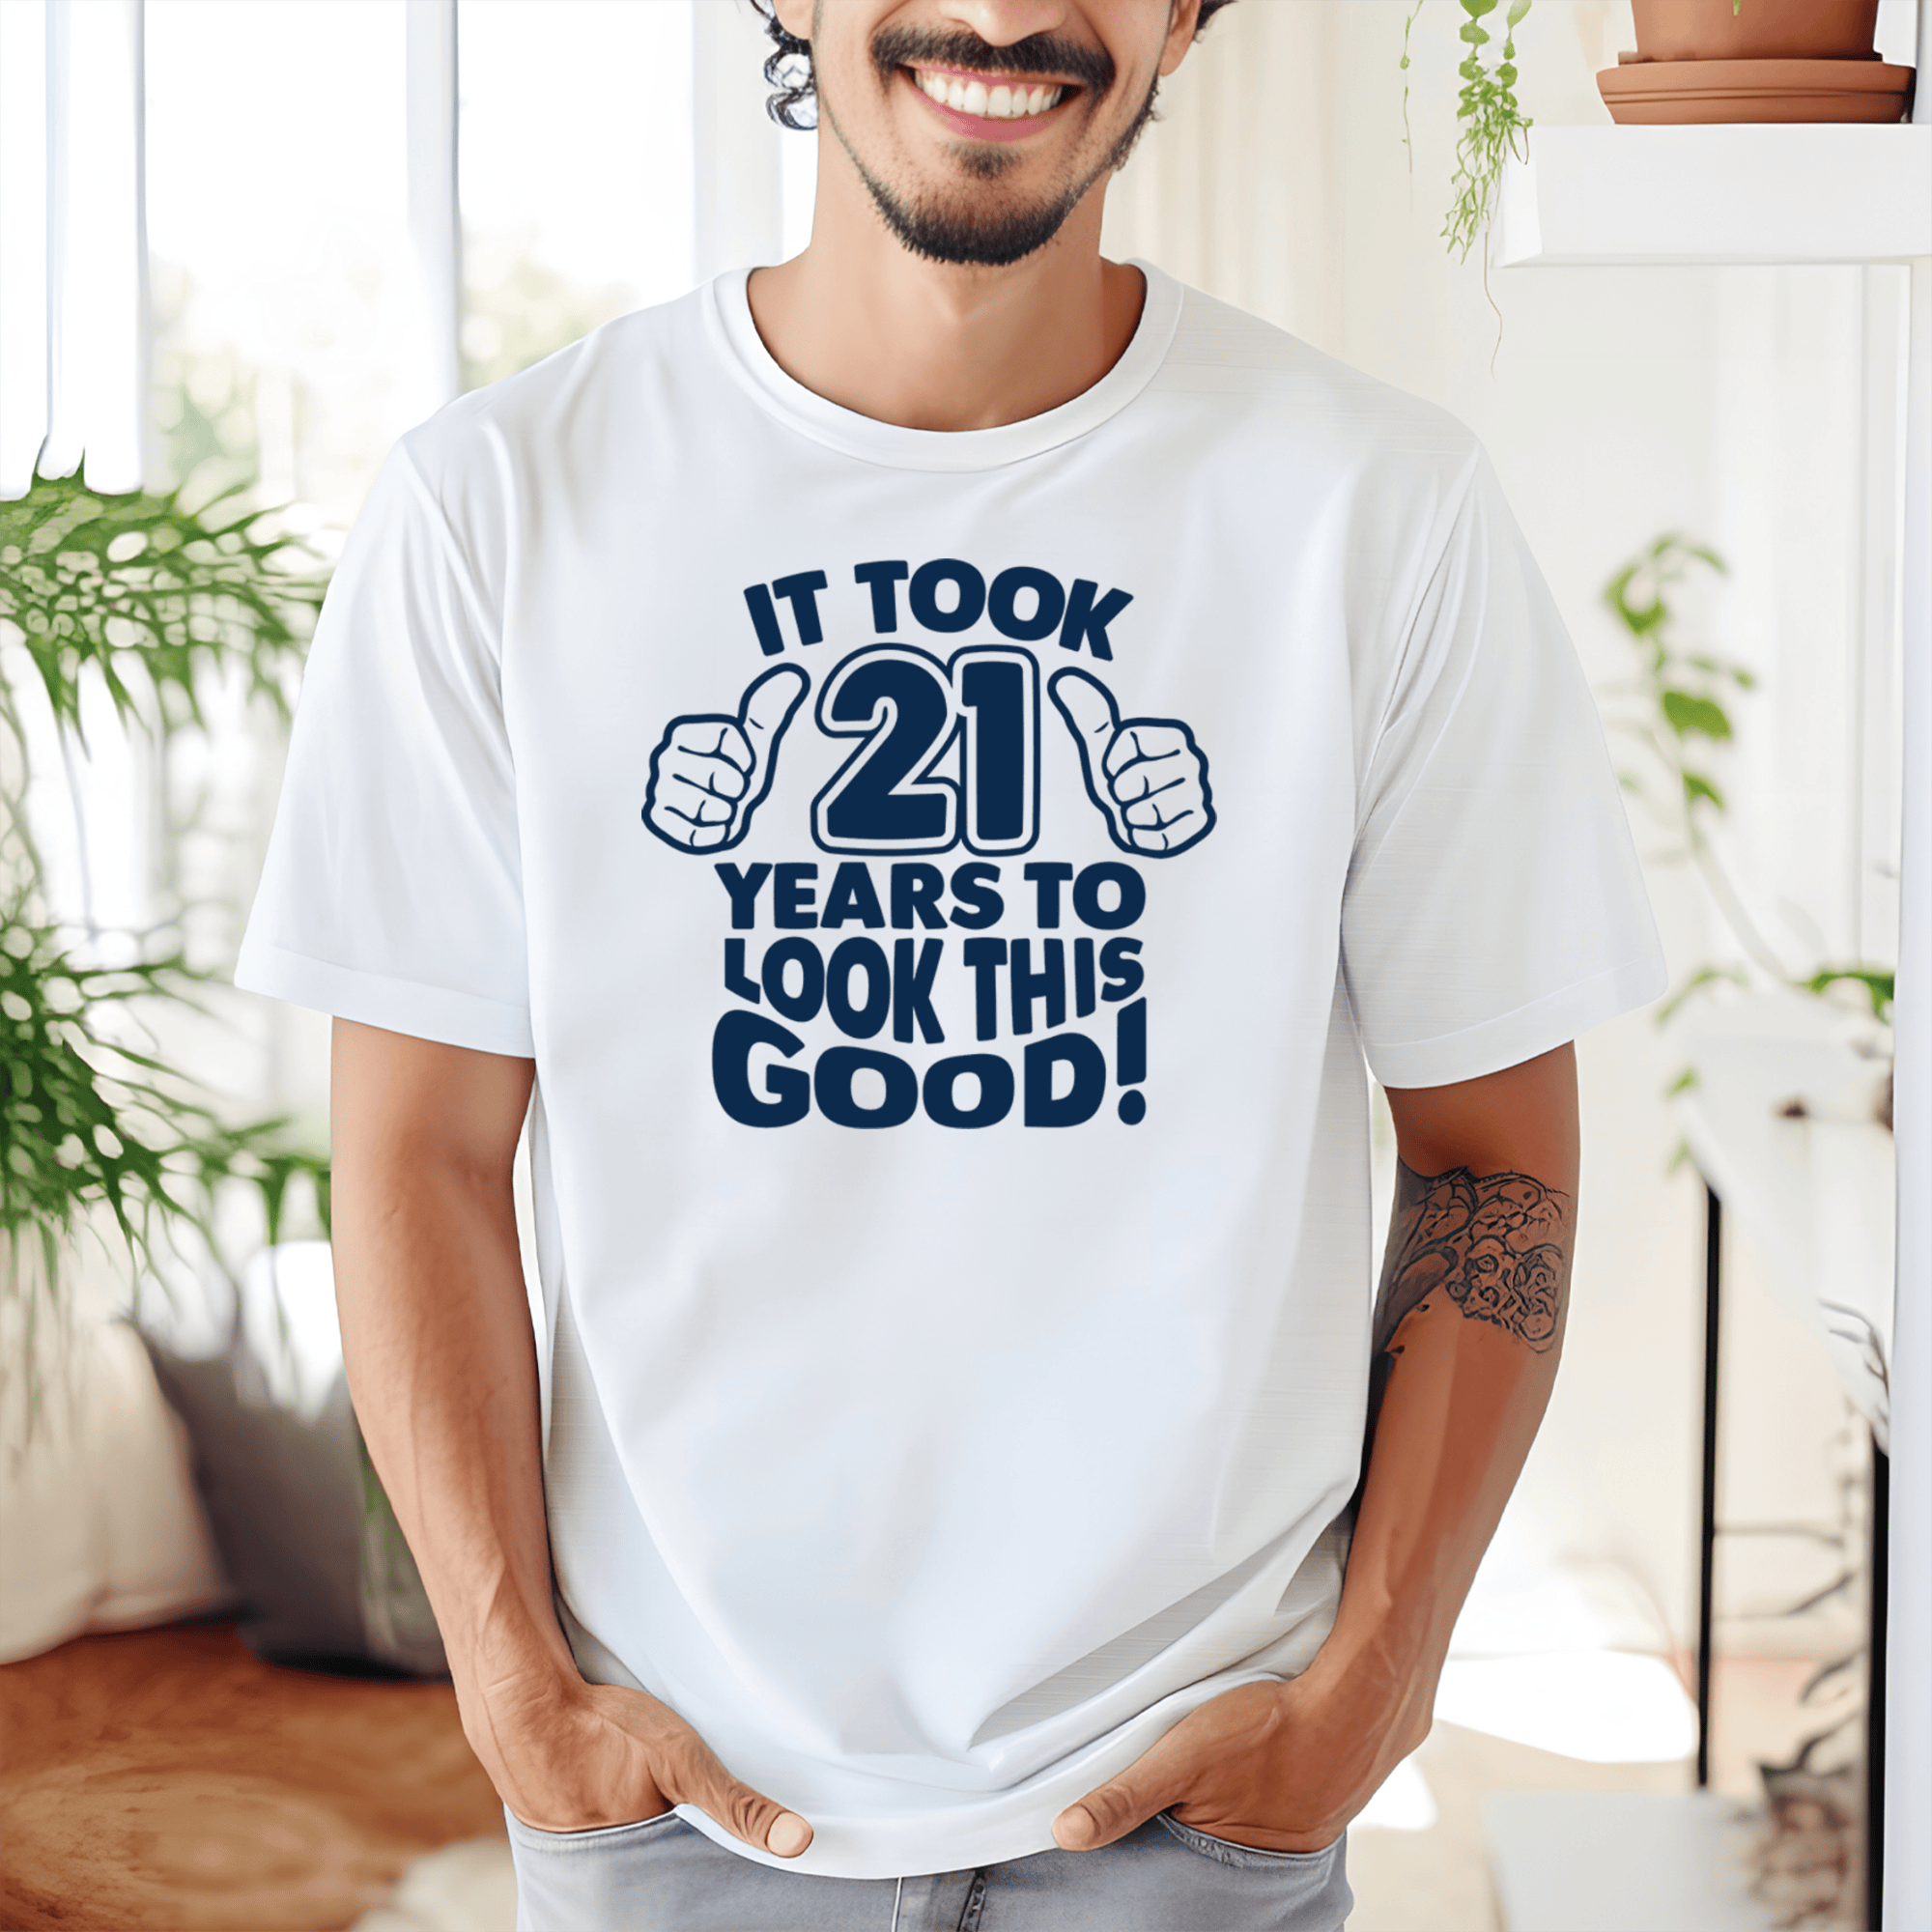 Mens White T Shirt with 21-Years-And-Lookin-Good design